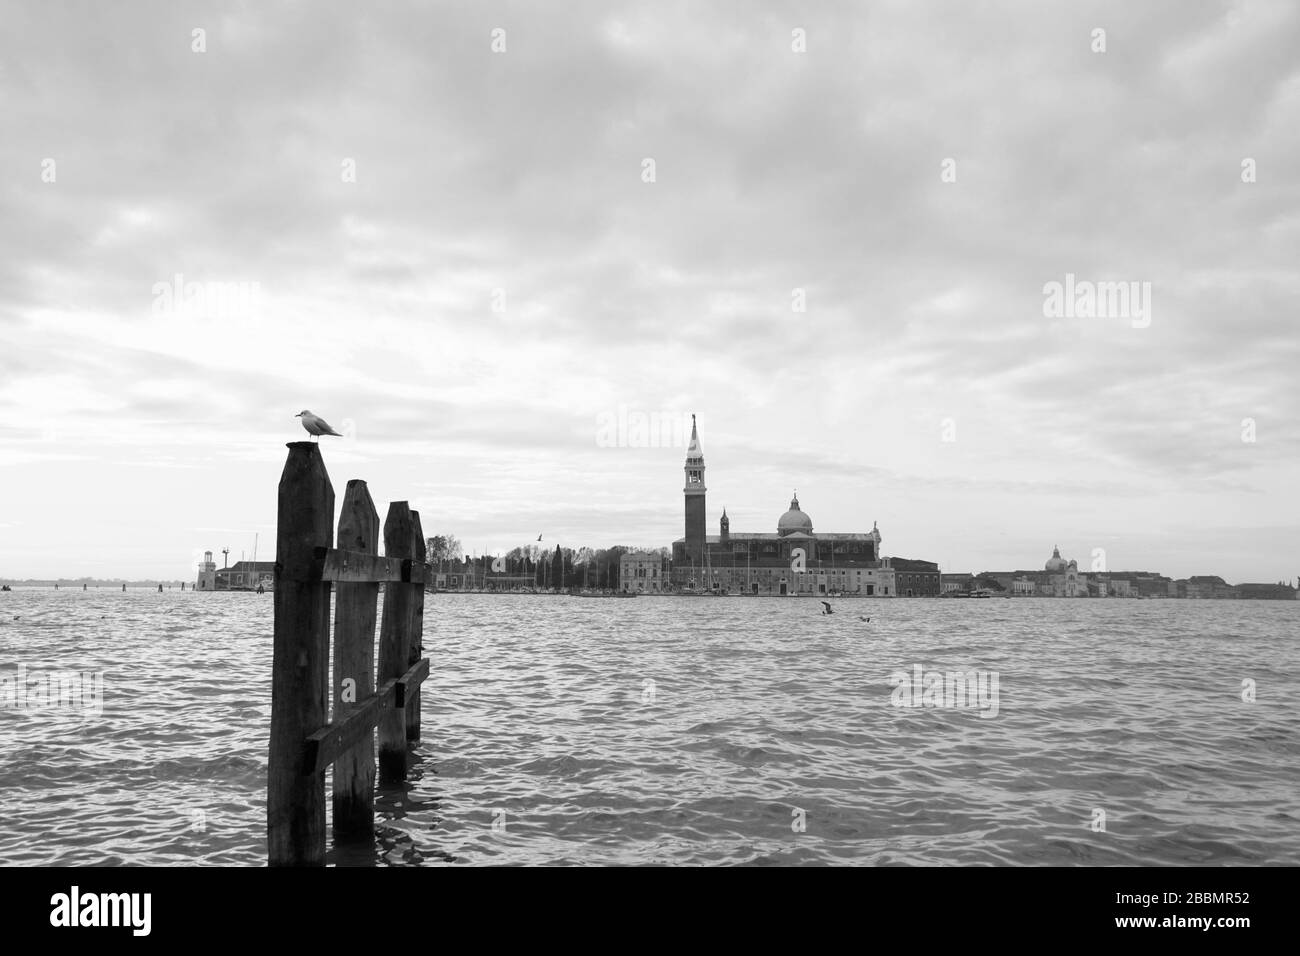 Saint George Greater church at the background in Venice, northern Italy. Stock Photo